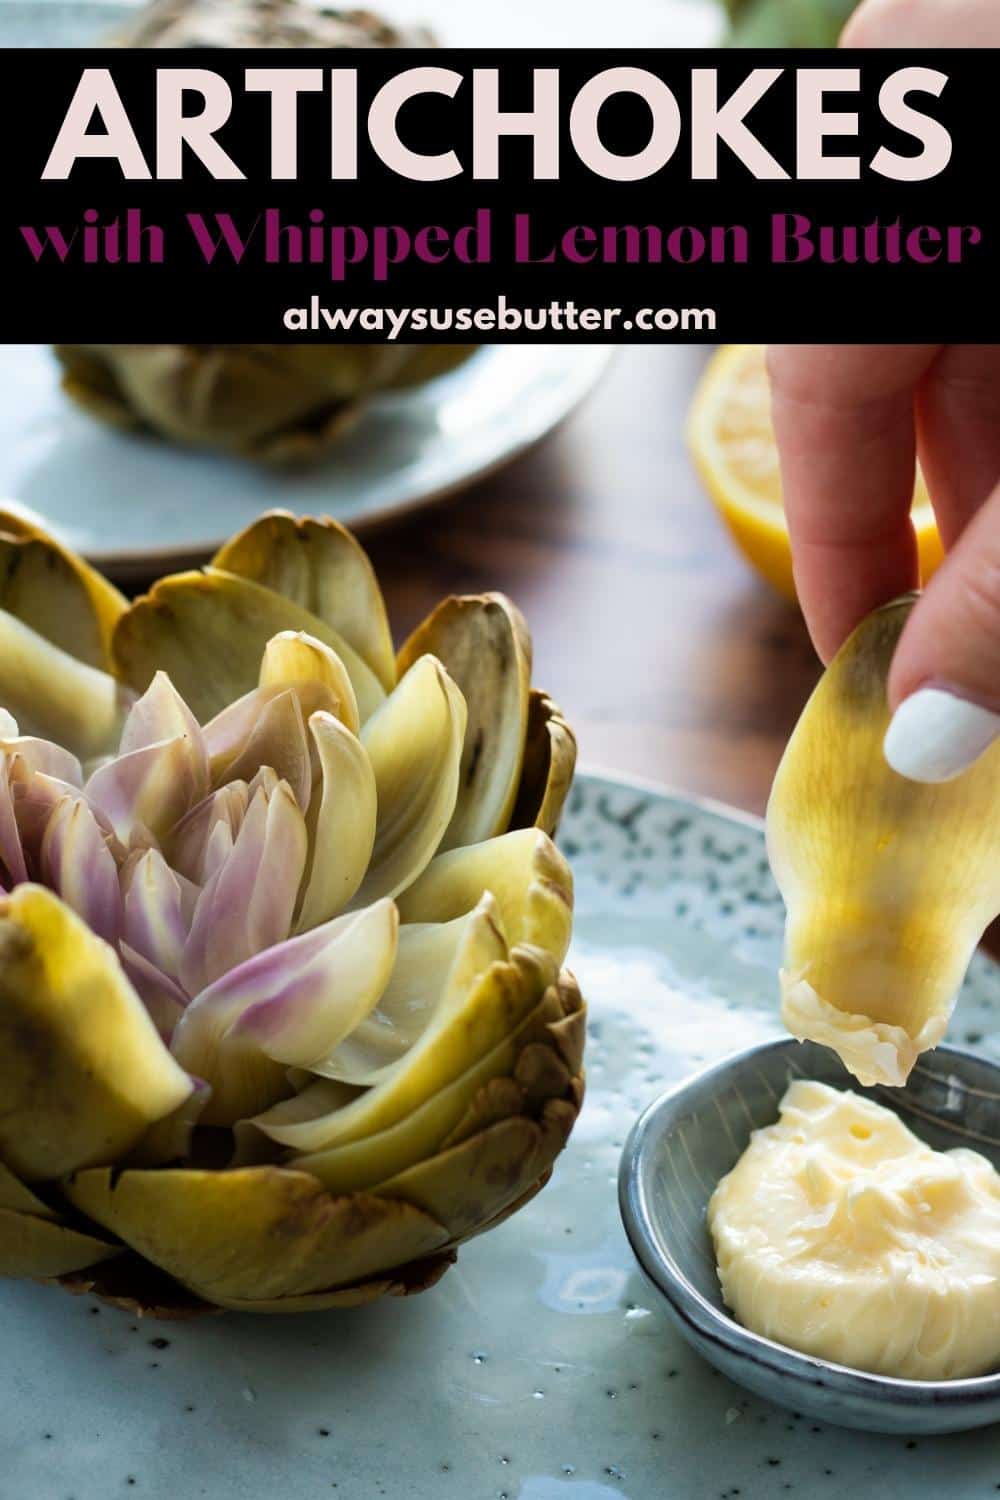 Boiled Artichokes With Whipped Lemon Butter How To Steam Them 2660